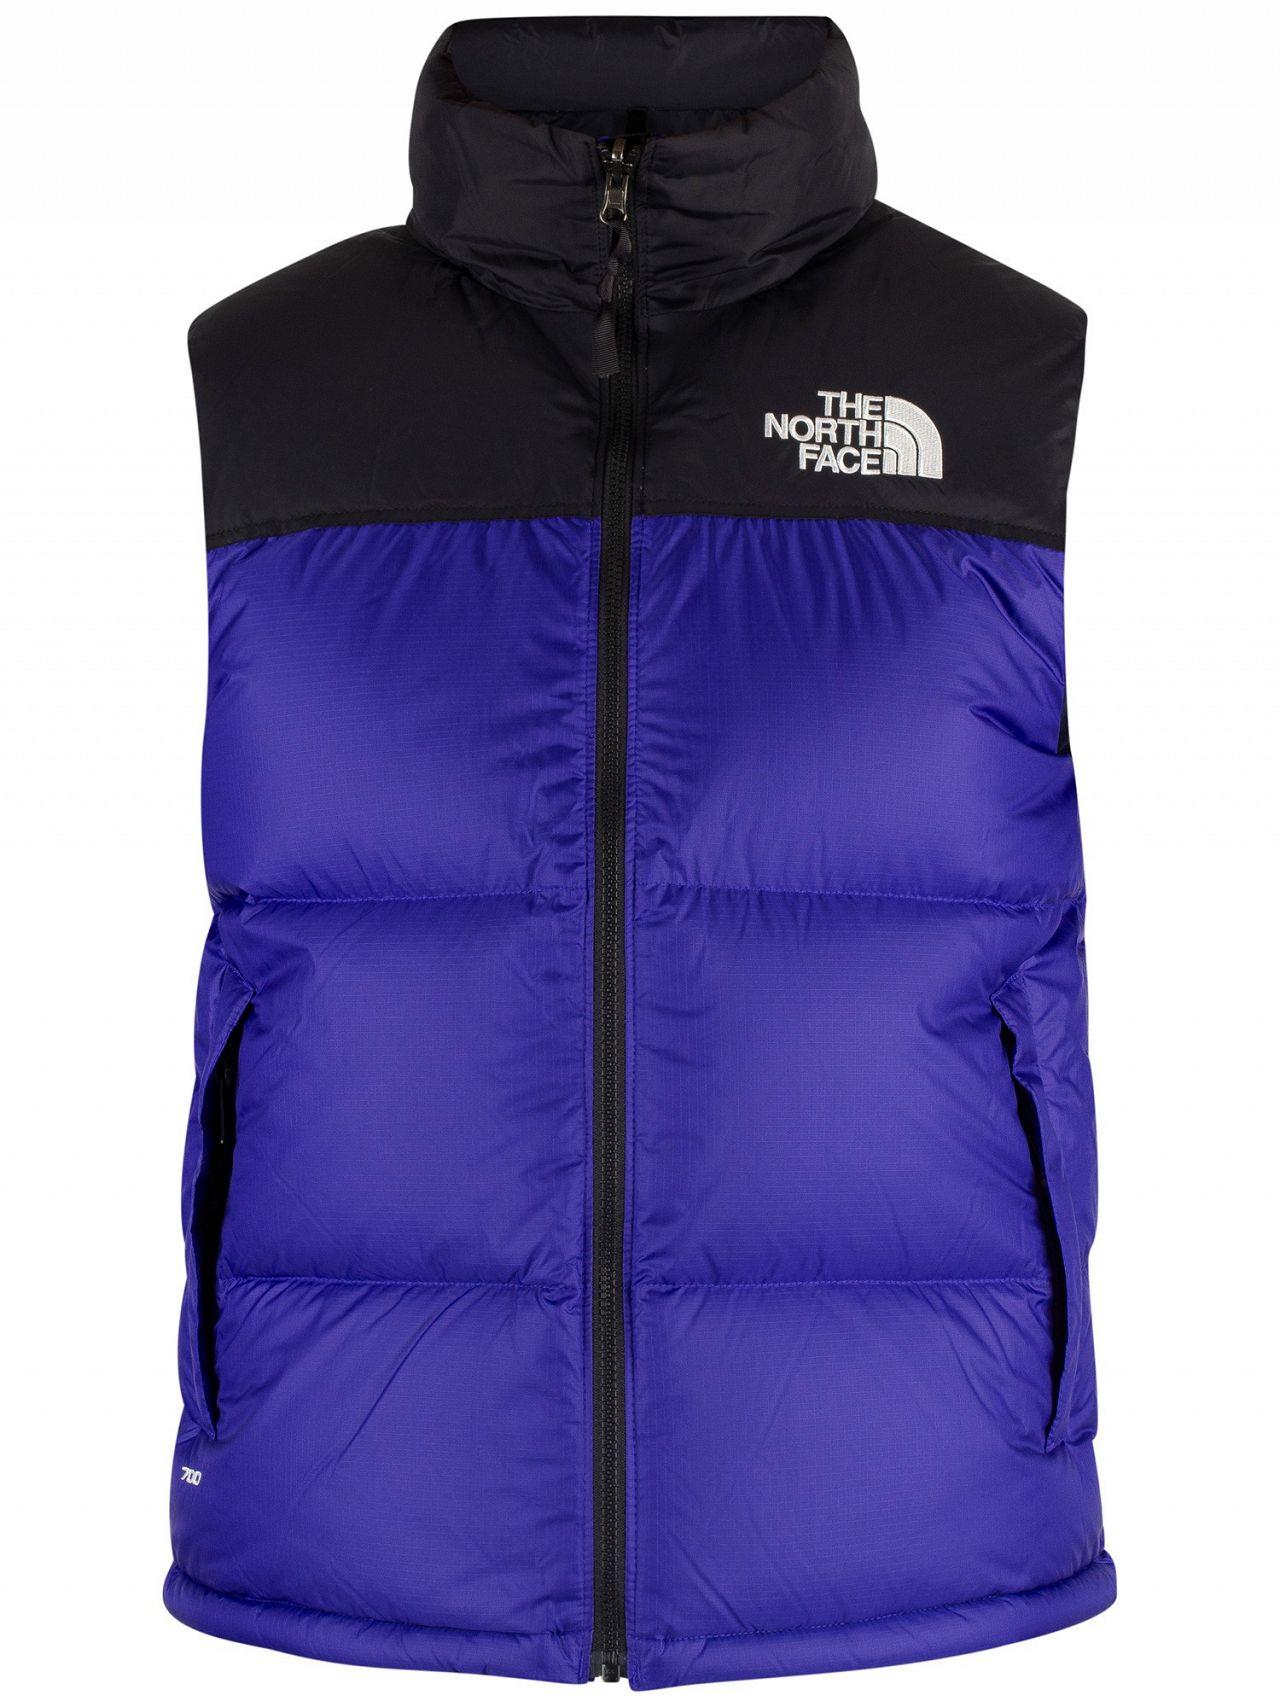 The North Face Synthetic Aztec Blue 1996 Retro Nuptse Gilet for Men - Lyst